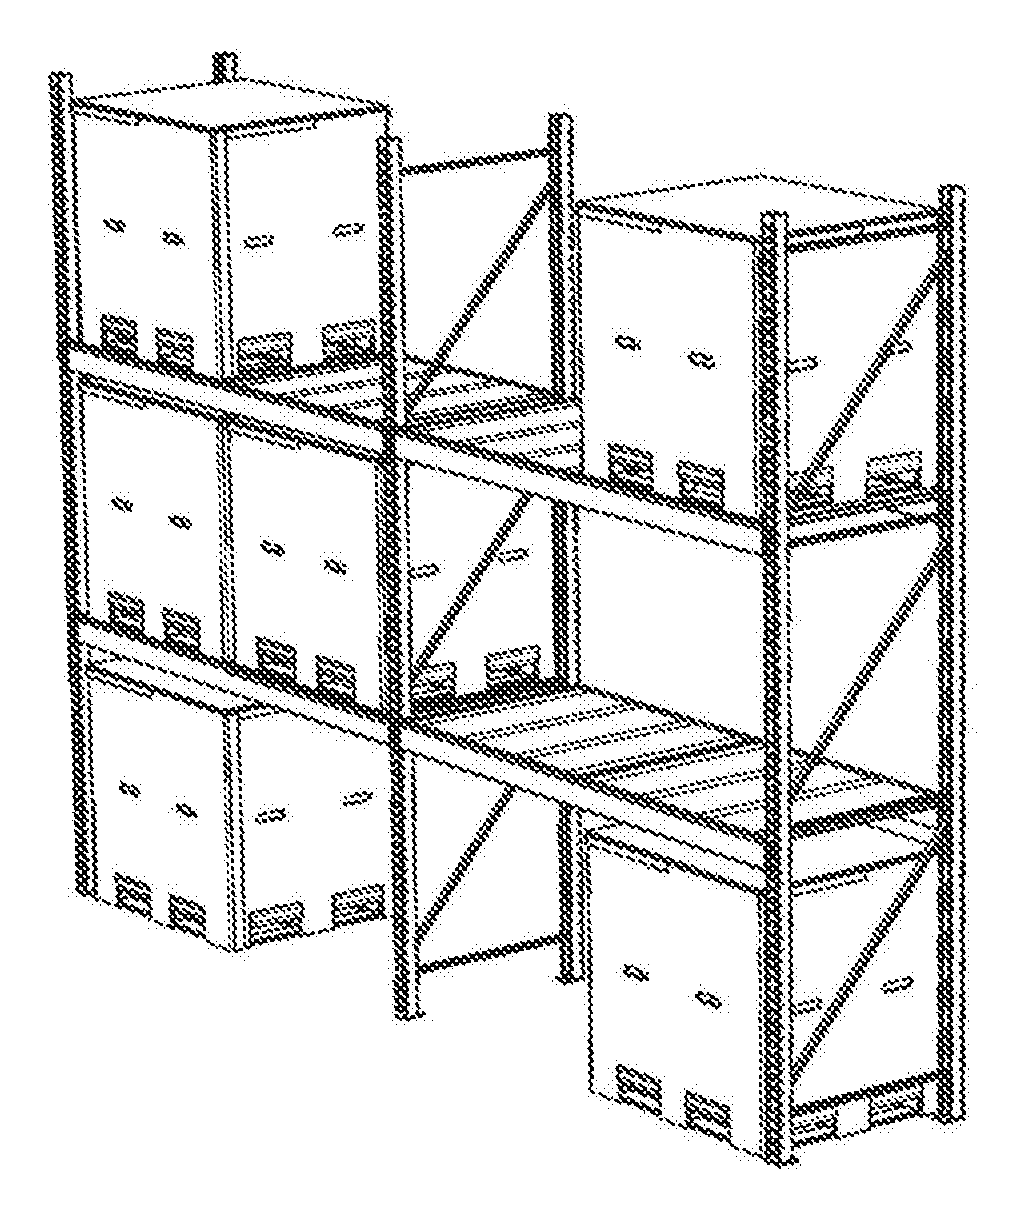 Transport and storage system